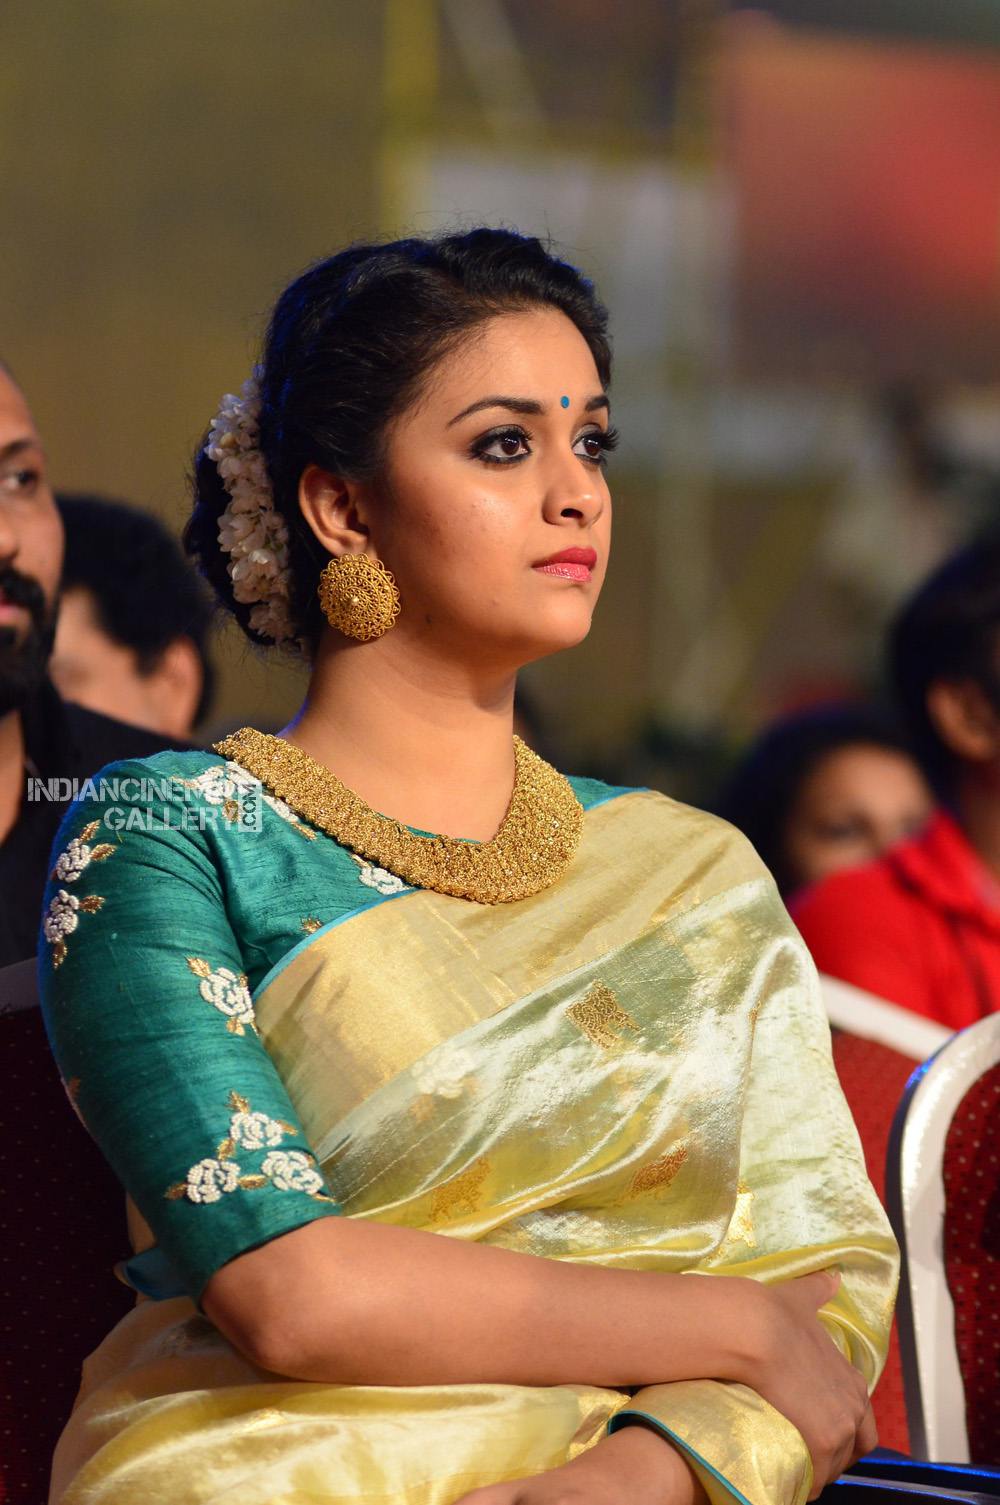 Keerthi Suresh At Asianet Film Awards 2018 9 Here is the list of malayalam films released in 2018. keerthi suresh at asianet film awards